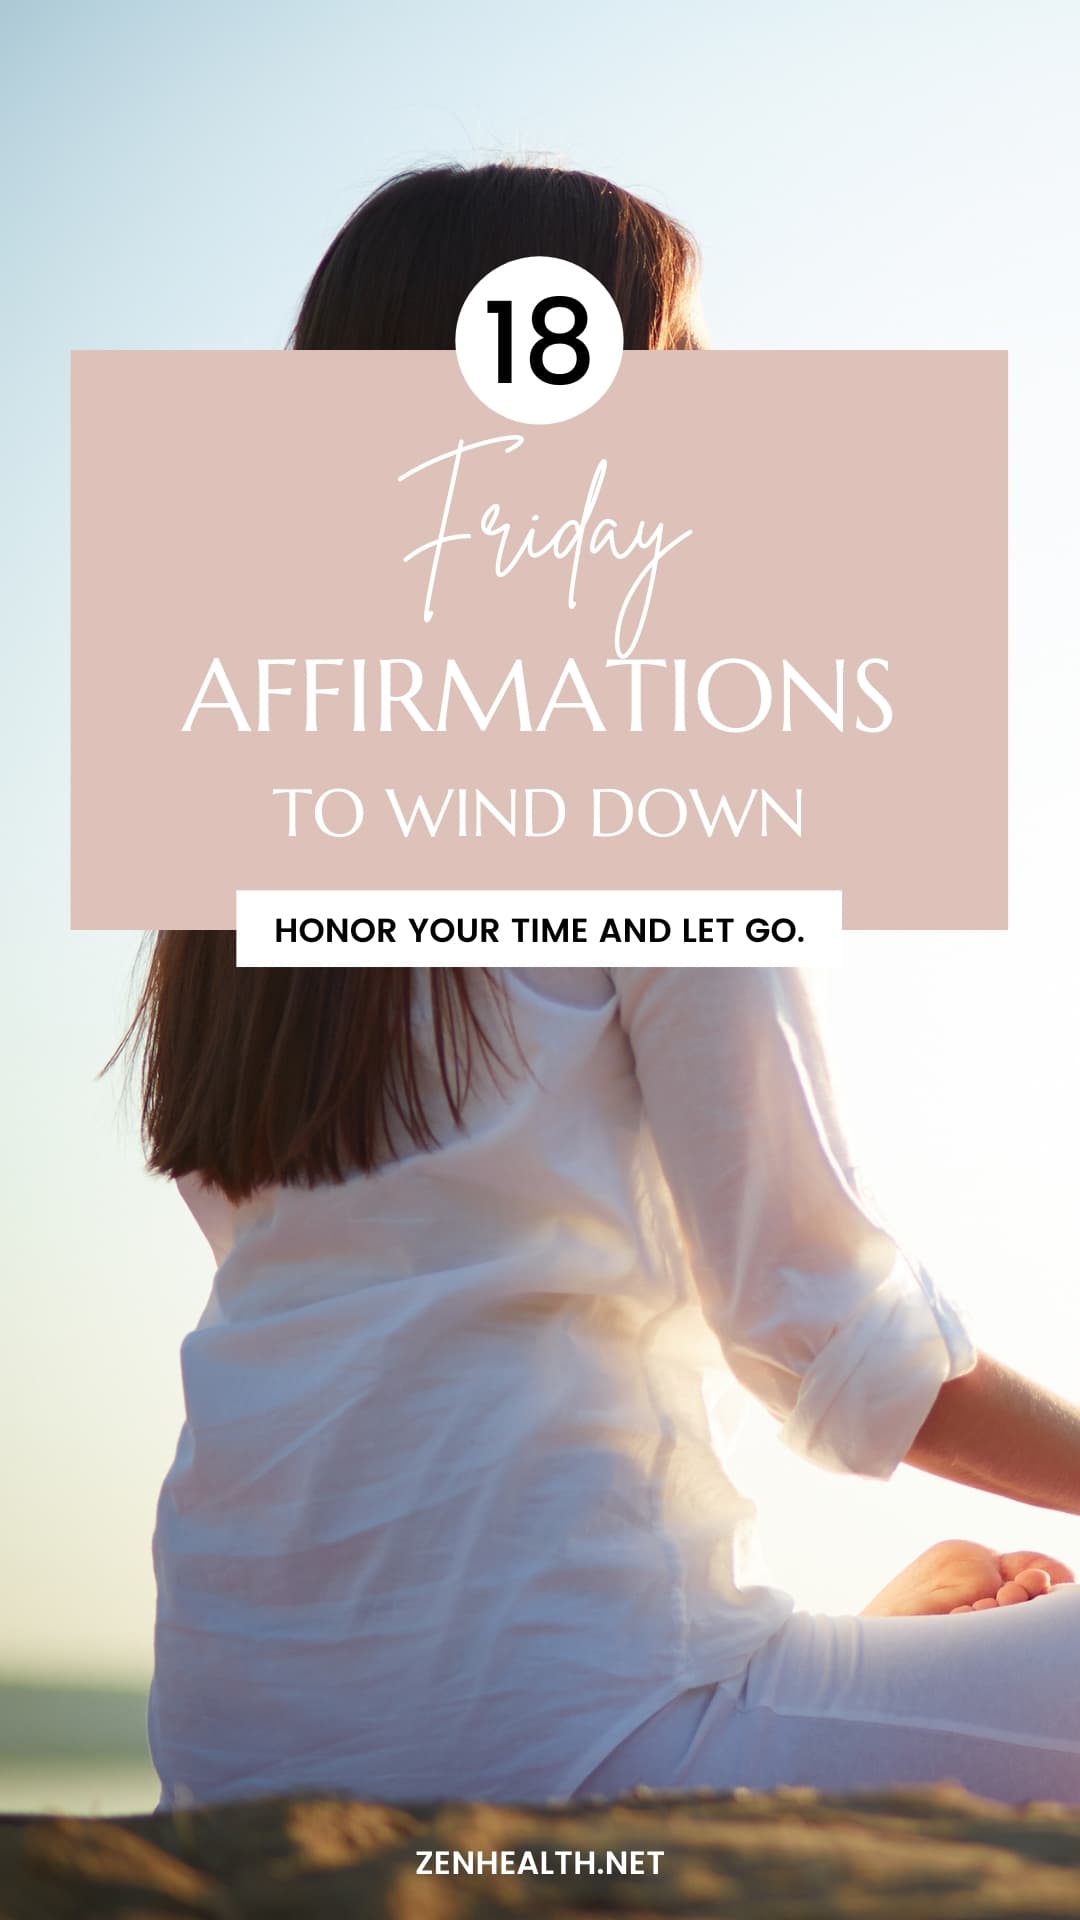 18 friday affirmations with meditation